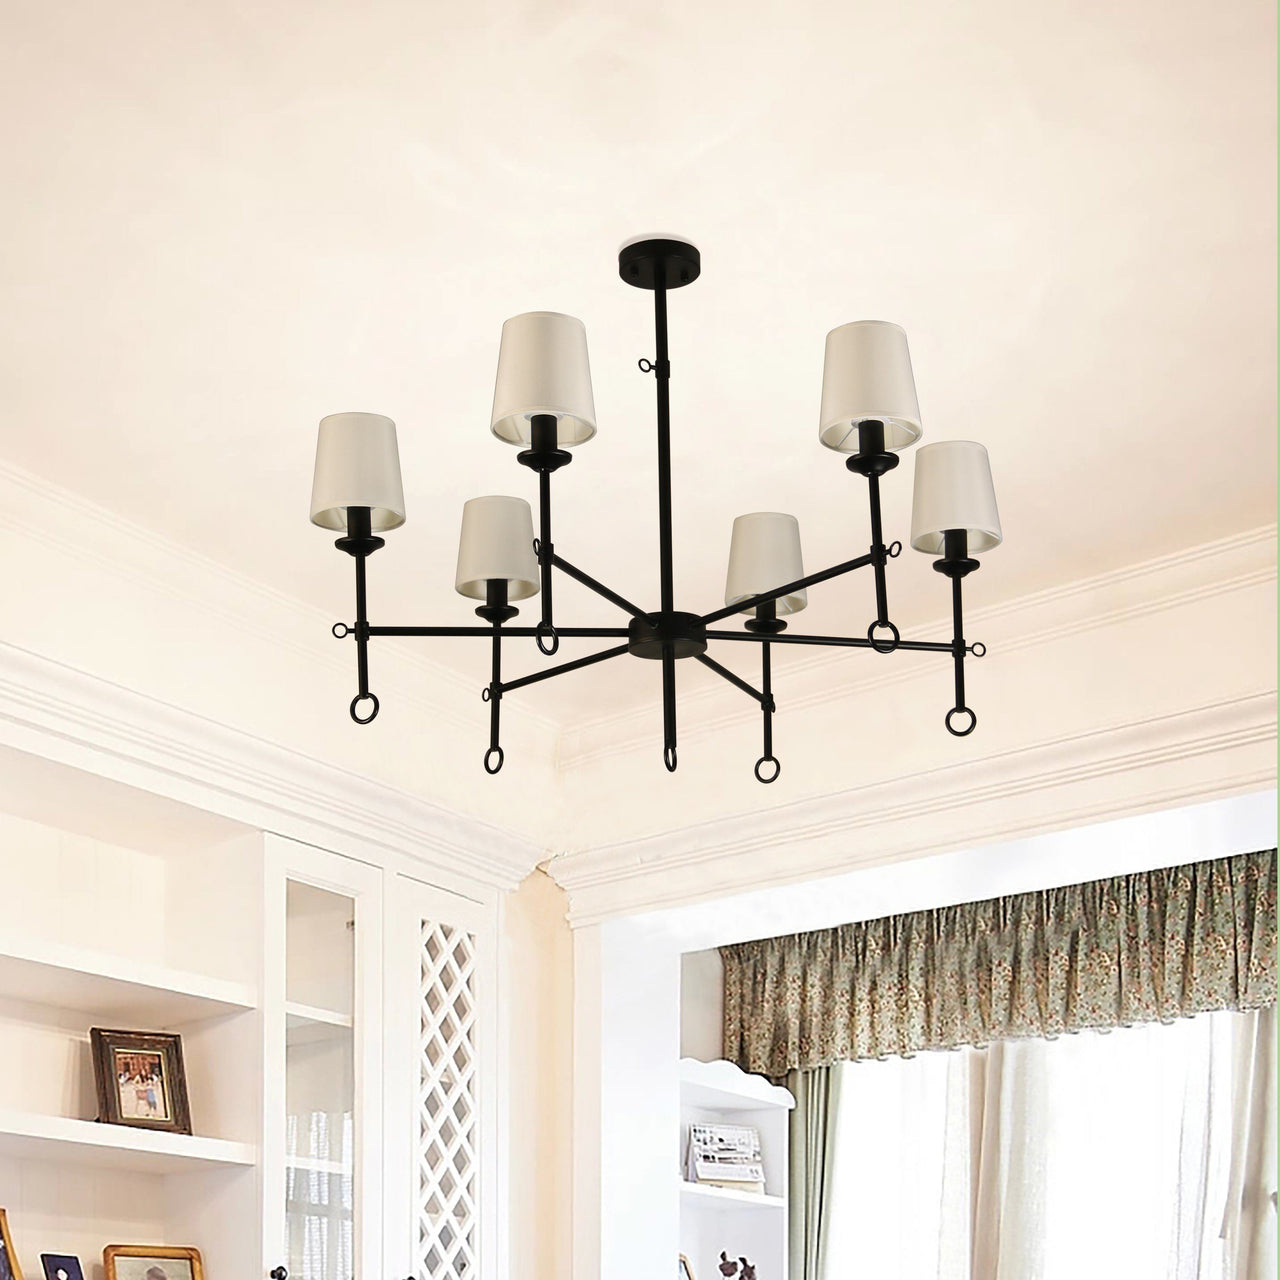 Angya 6-Shade Chandelier Light | Bamboo Lampshades and Matte Black Steel Supports | Fixed 19” Center Rod | Dining Room, Foyer, Entryway Décor Chandeliers Canyon Home 